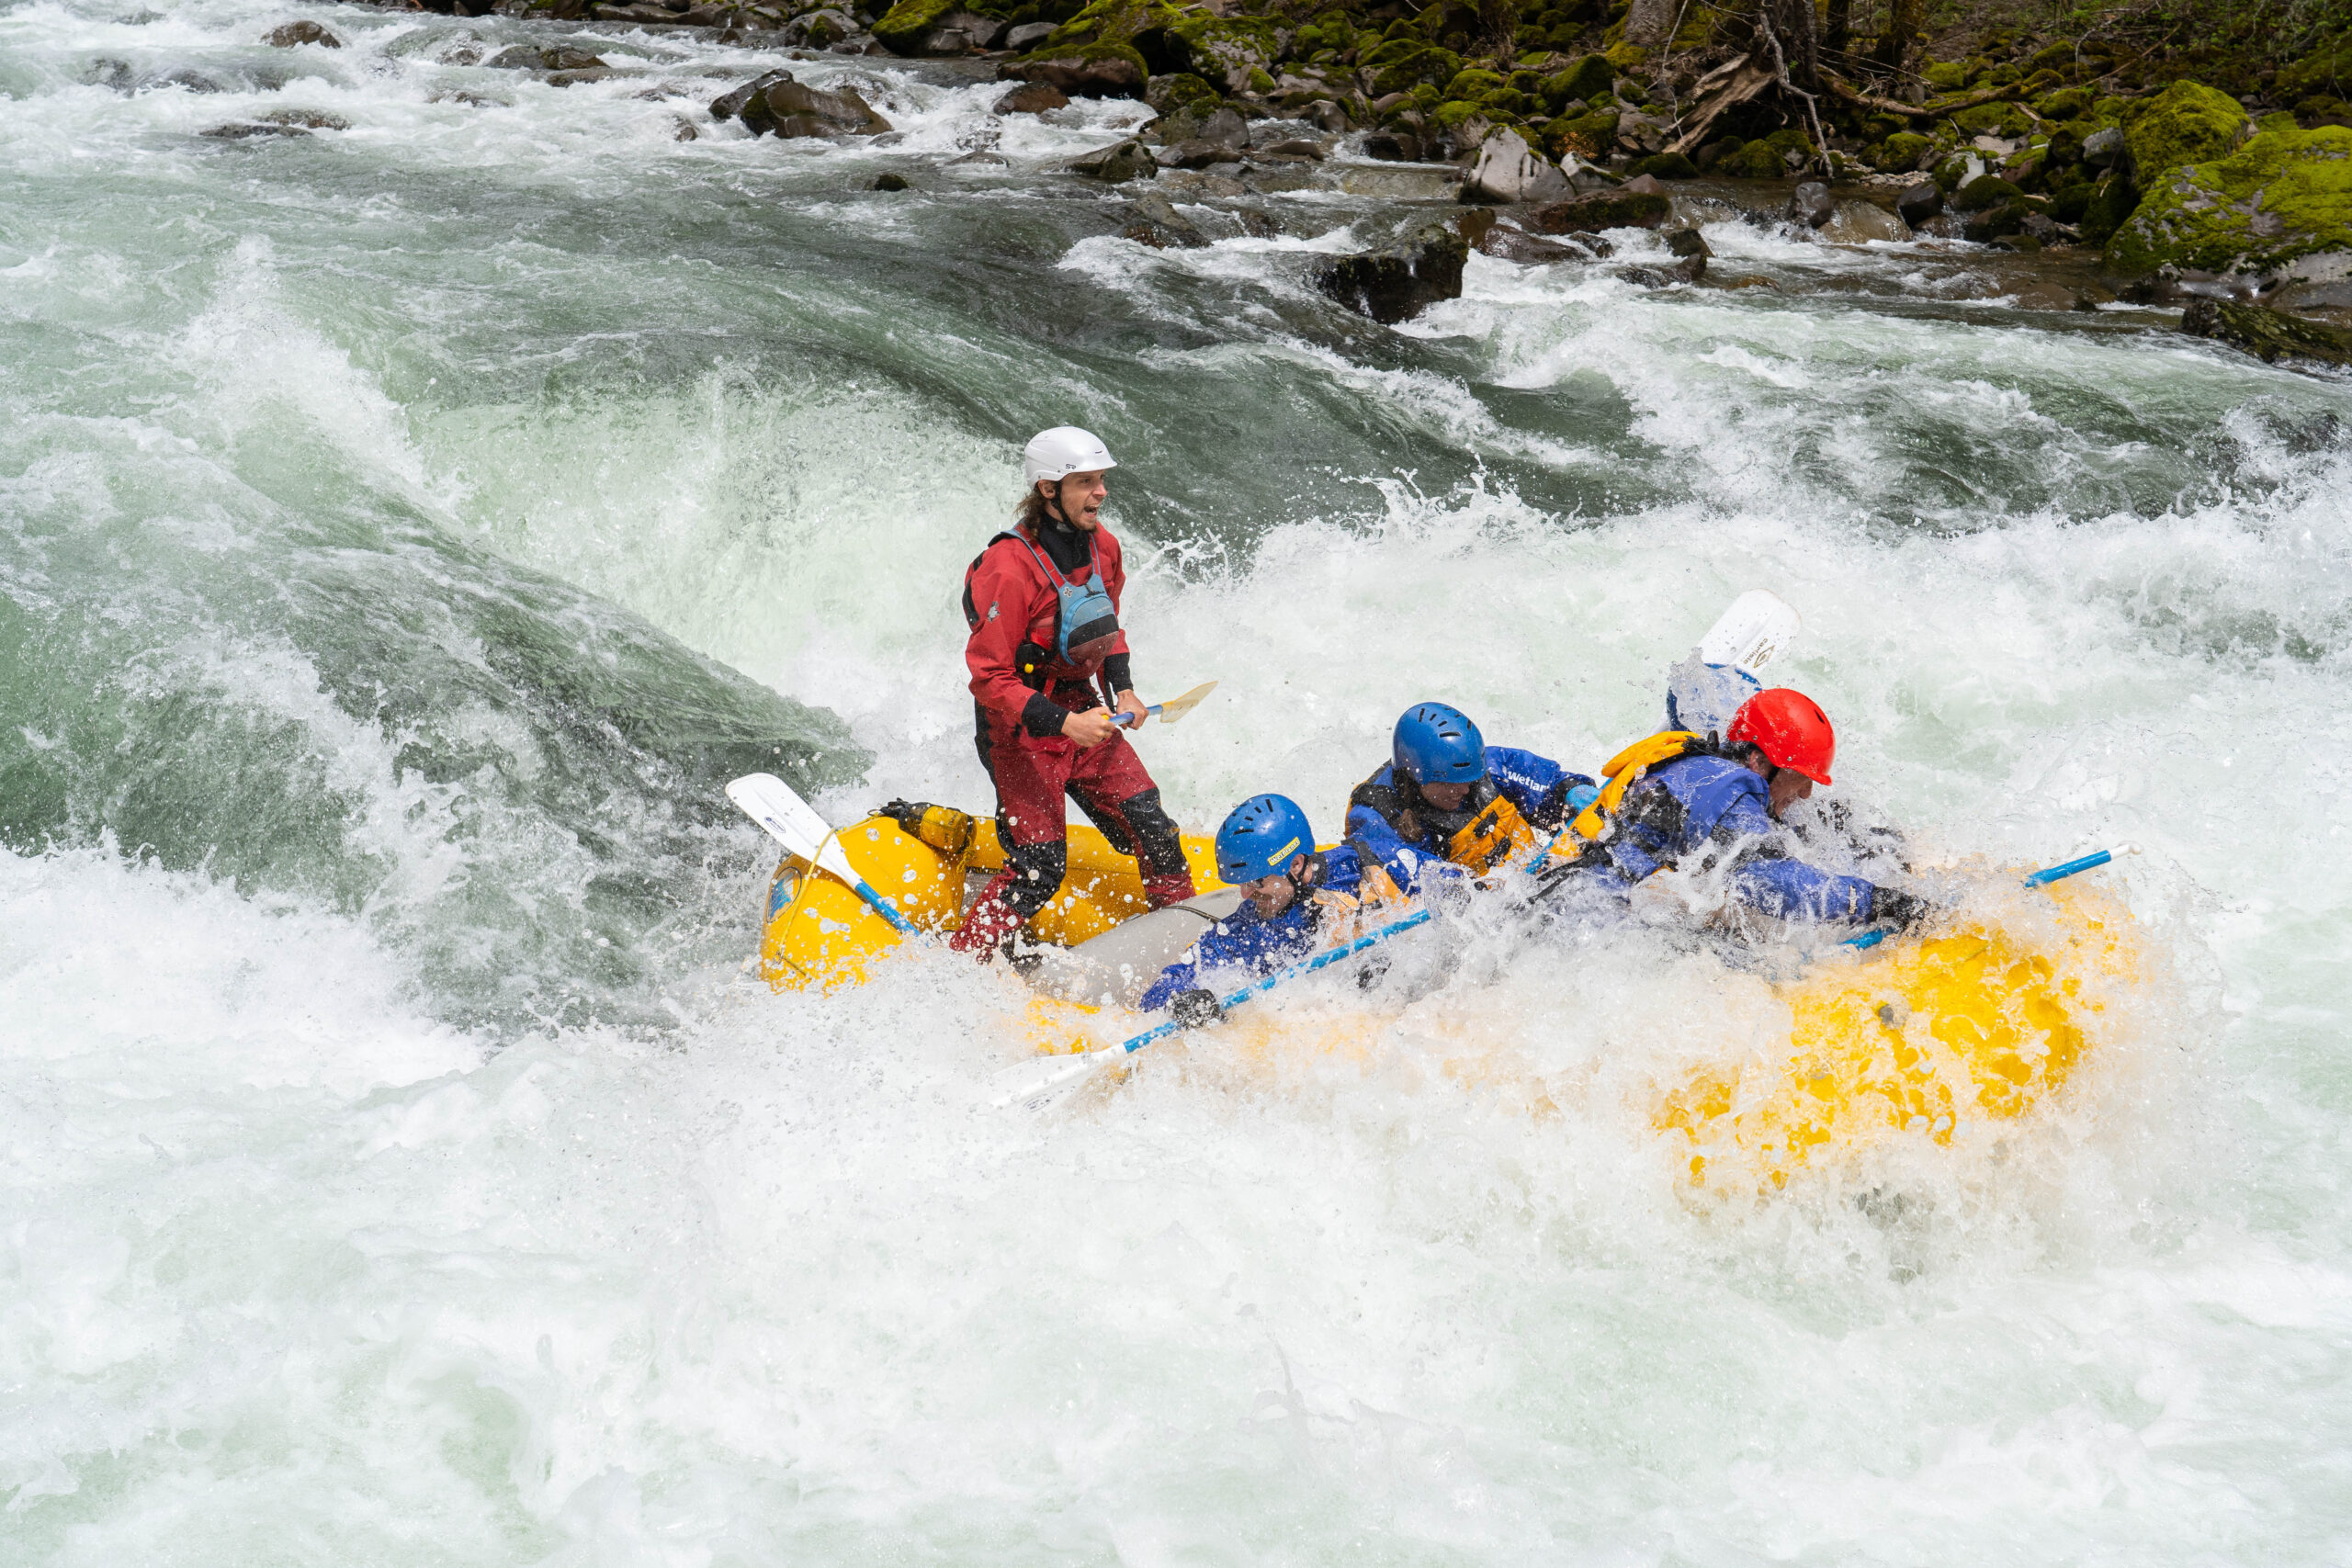 Group of people going into a rapid on the Wind River